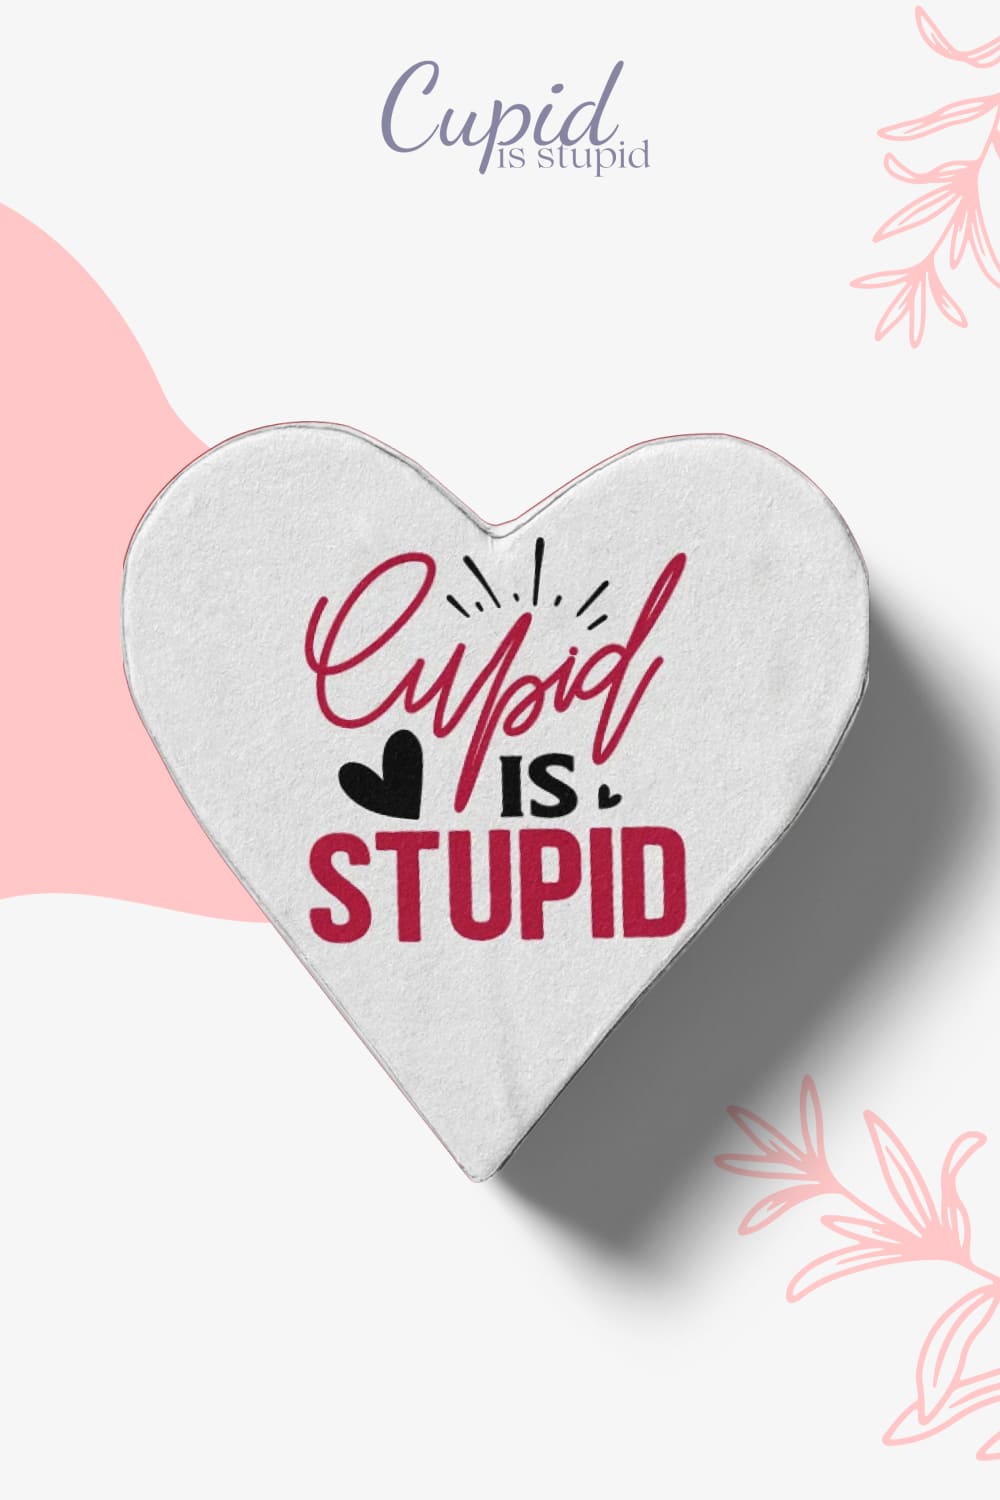 Cupid is stupid - pinterest image preview.